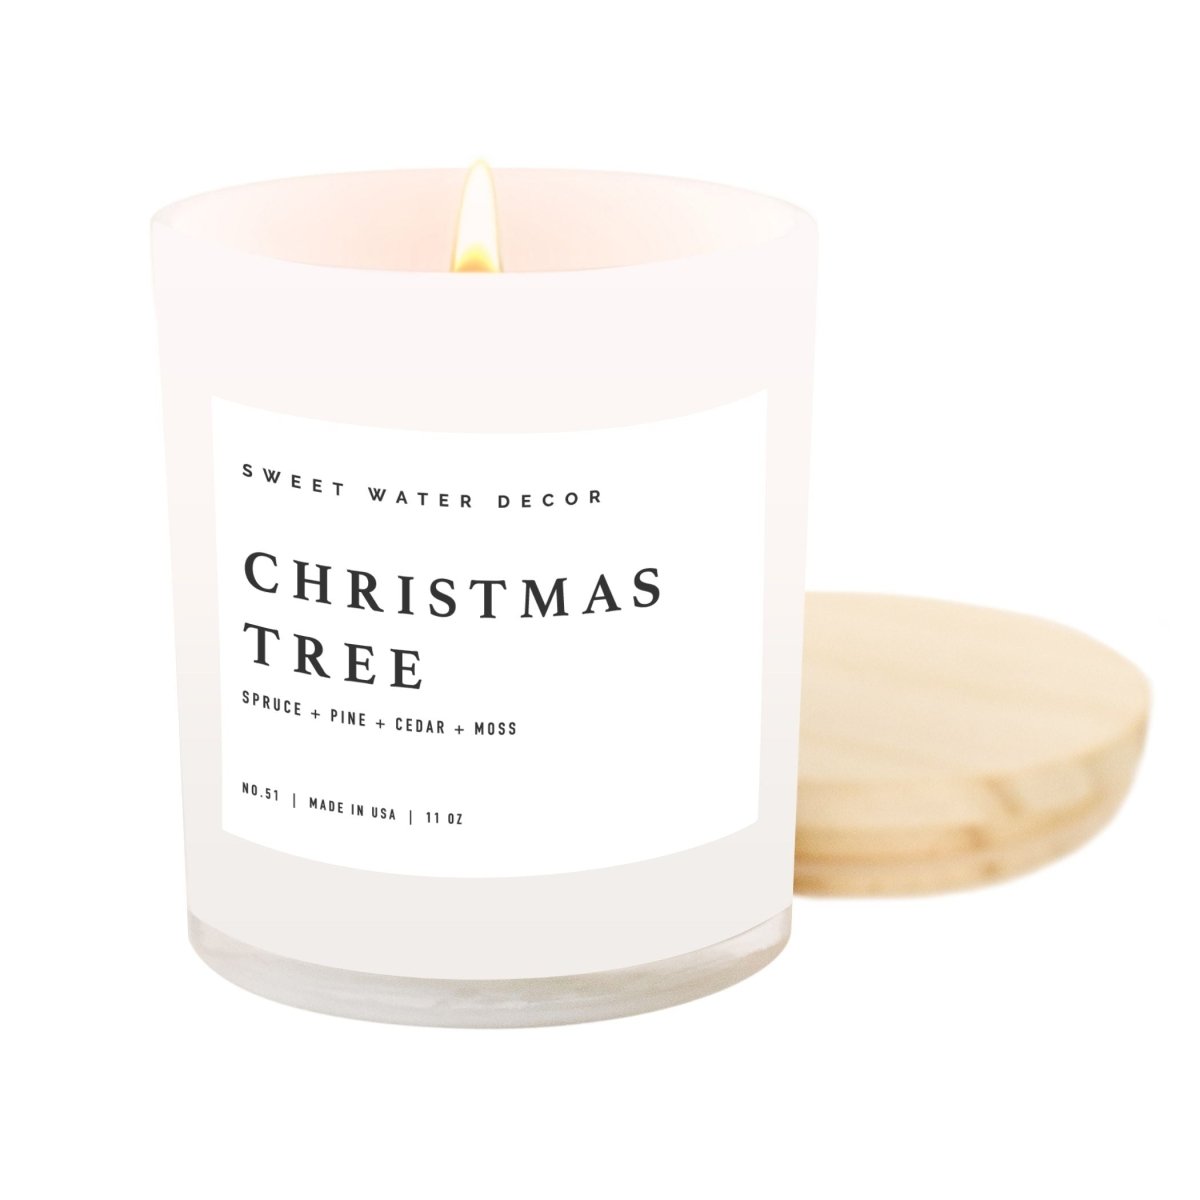 Sweet Water Decor Christmas Tree Soy Candle - White Jar - 11 oz - lily & onyx